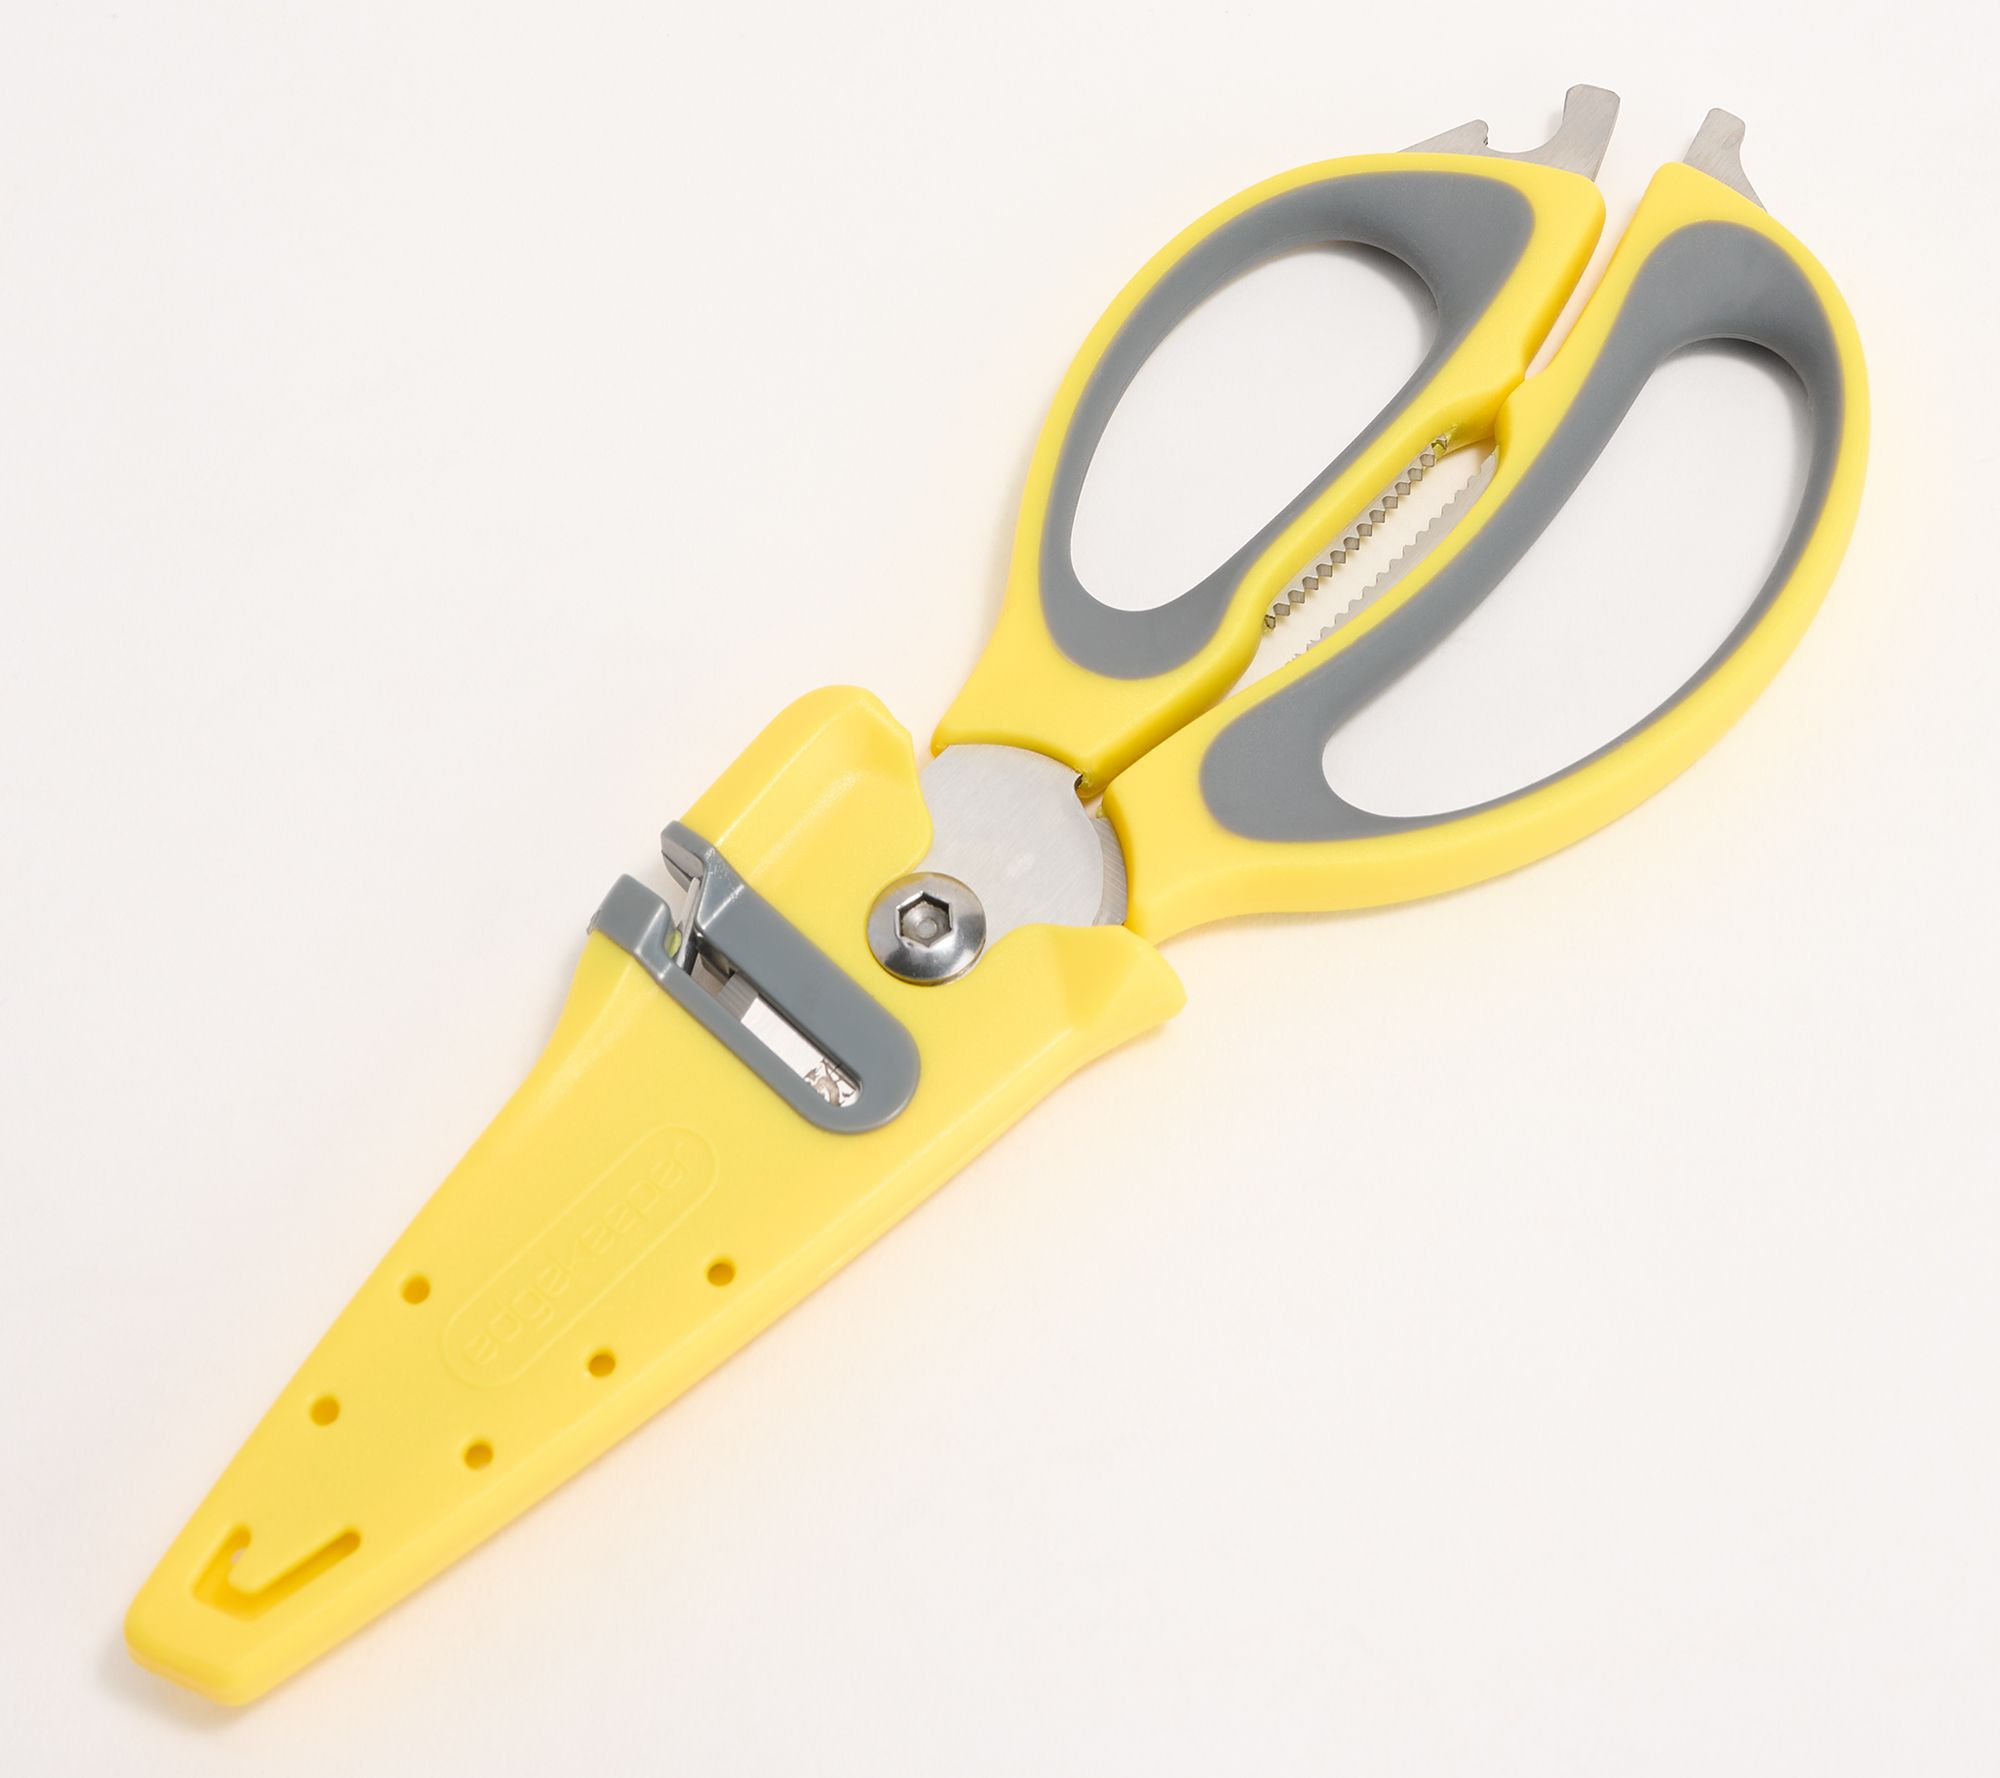 New AVANTI Dura Edge Herb Dicing Scissors Shears with Cleaning Comb Free  Post